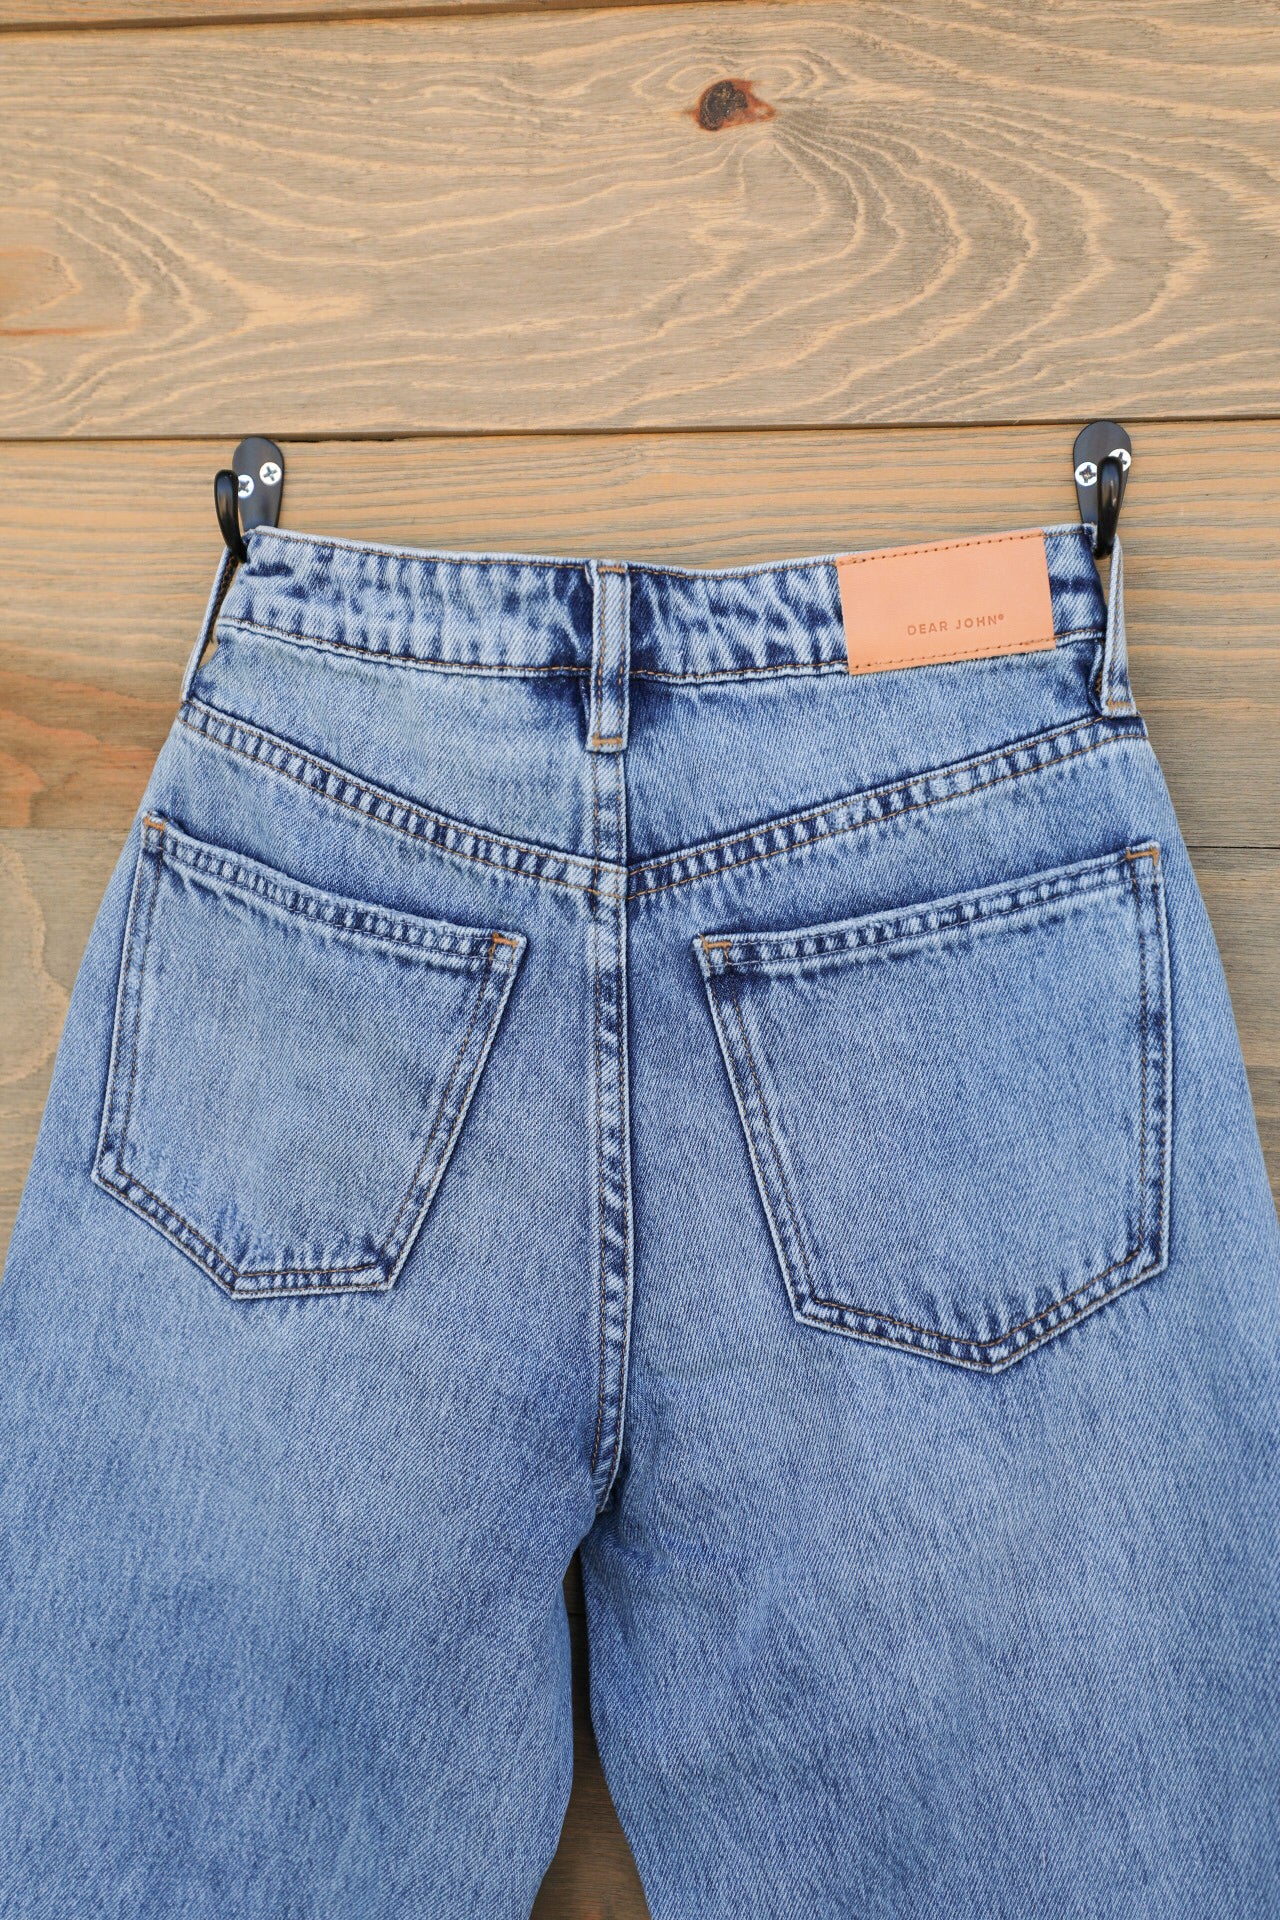 90's Jeans-Pants-Crooked Horn Company, Online Women's Fashion Boutique in San Tan Valley, Arizona 85140